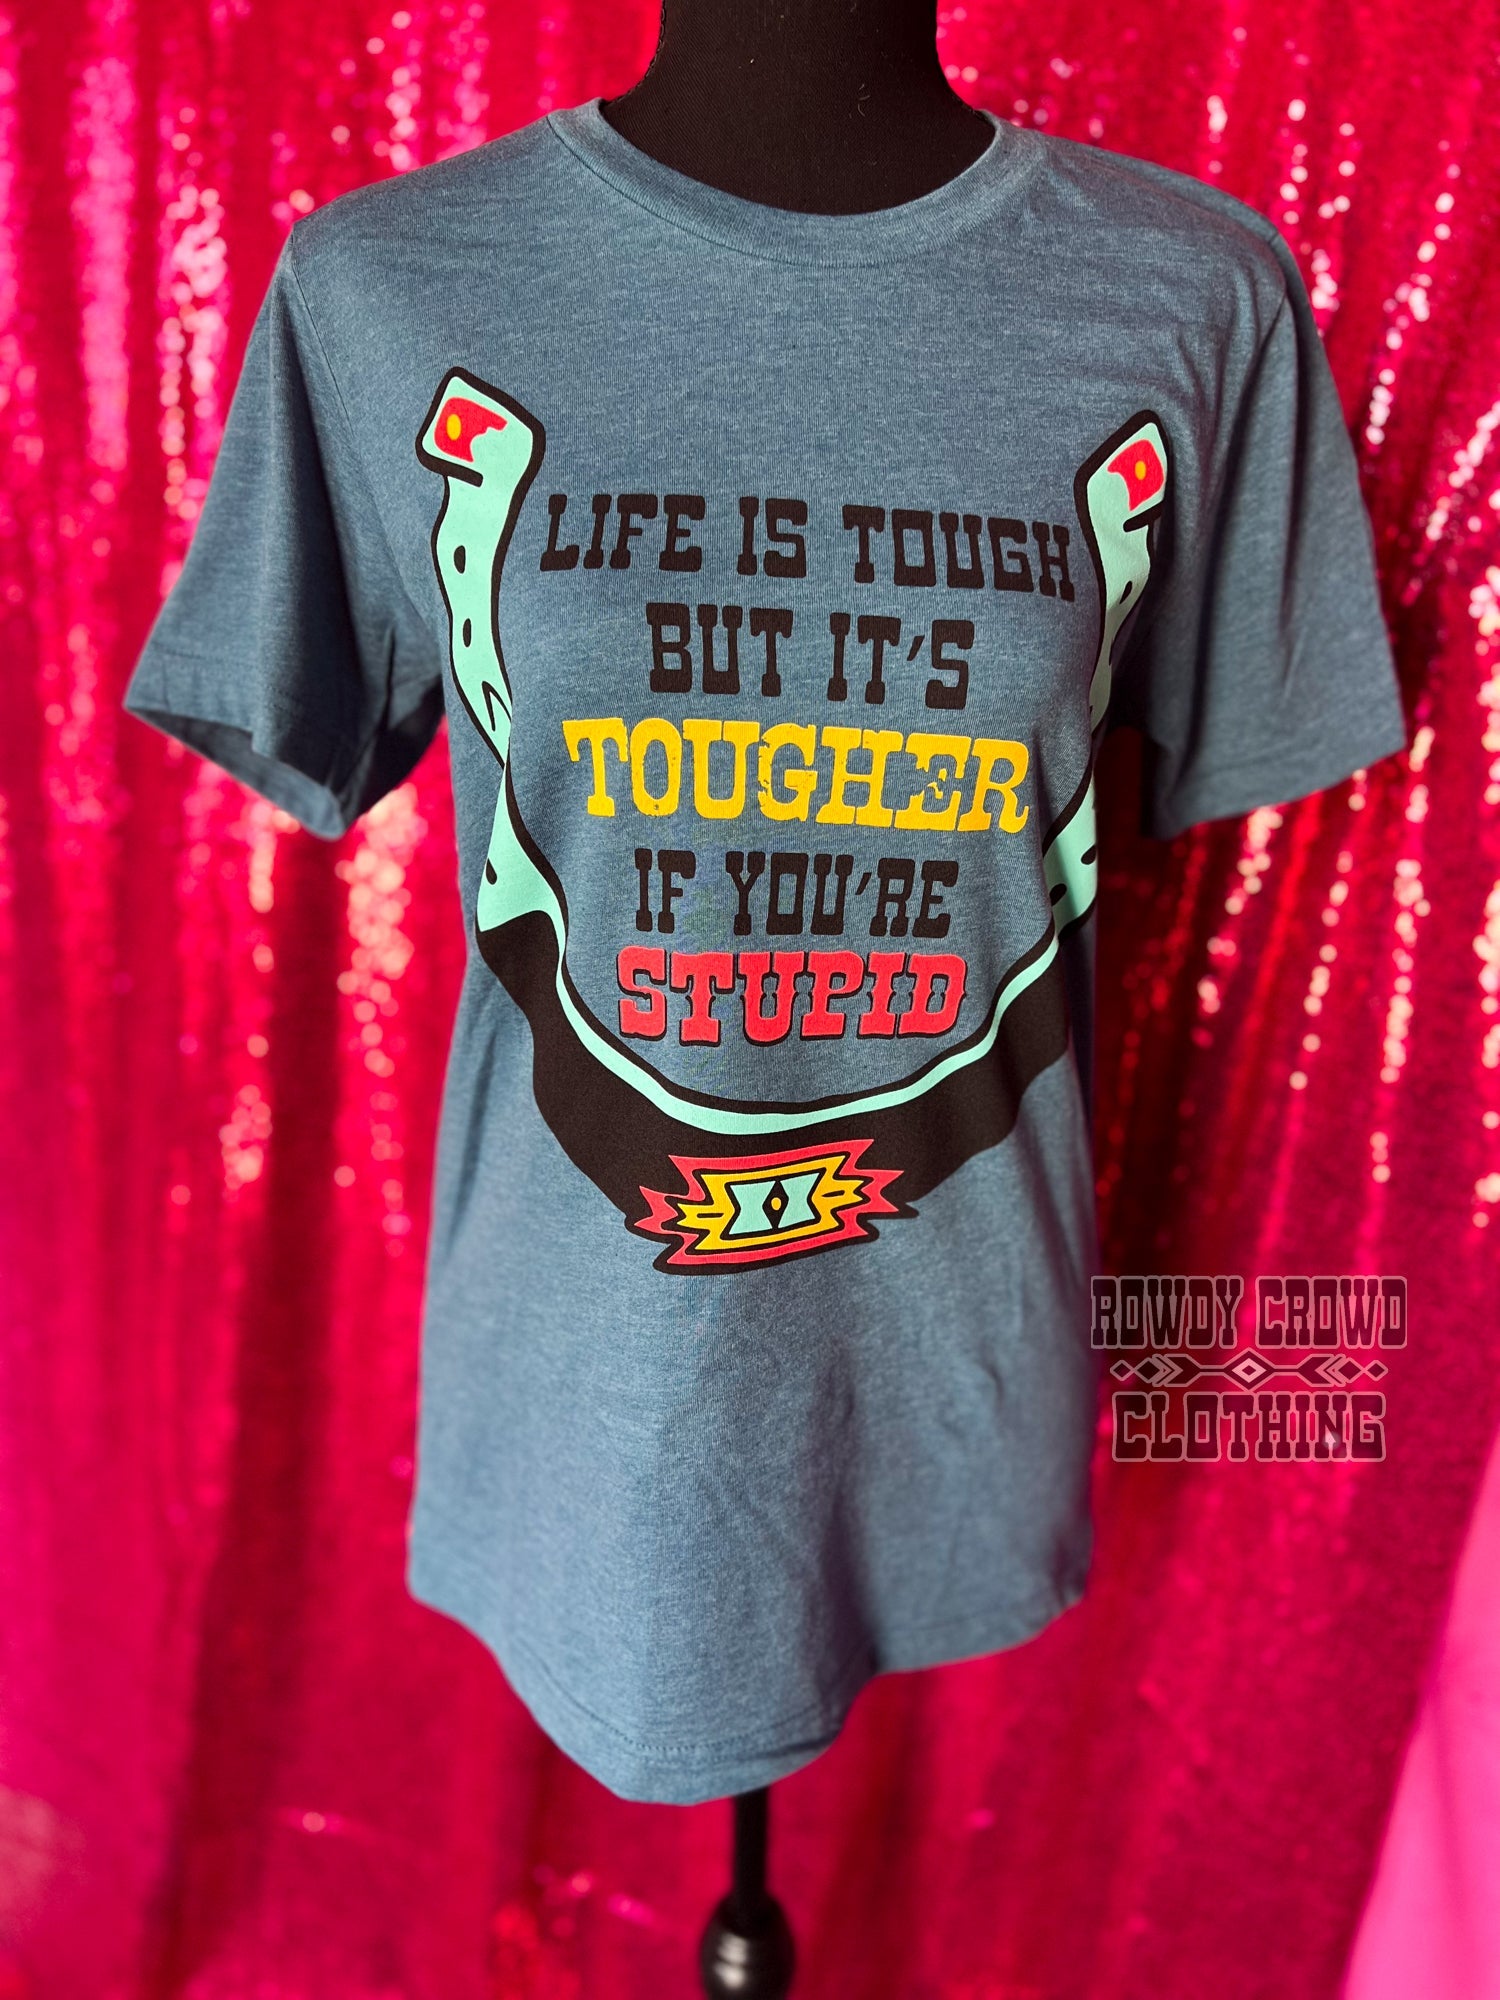 western apparel, western graphic tee, graphic western tees, wholesale clothing, western wholesale, women's western graphic tees, wholesale clothing and jewelry, western boutique clothing, western women's graphic tee, western cowgirl tee, western horseshoe tee, John Wayne quote graphic tee, tougher if you're stupid graphic tee